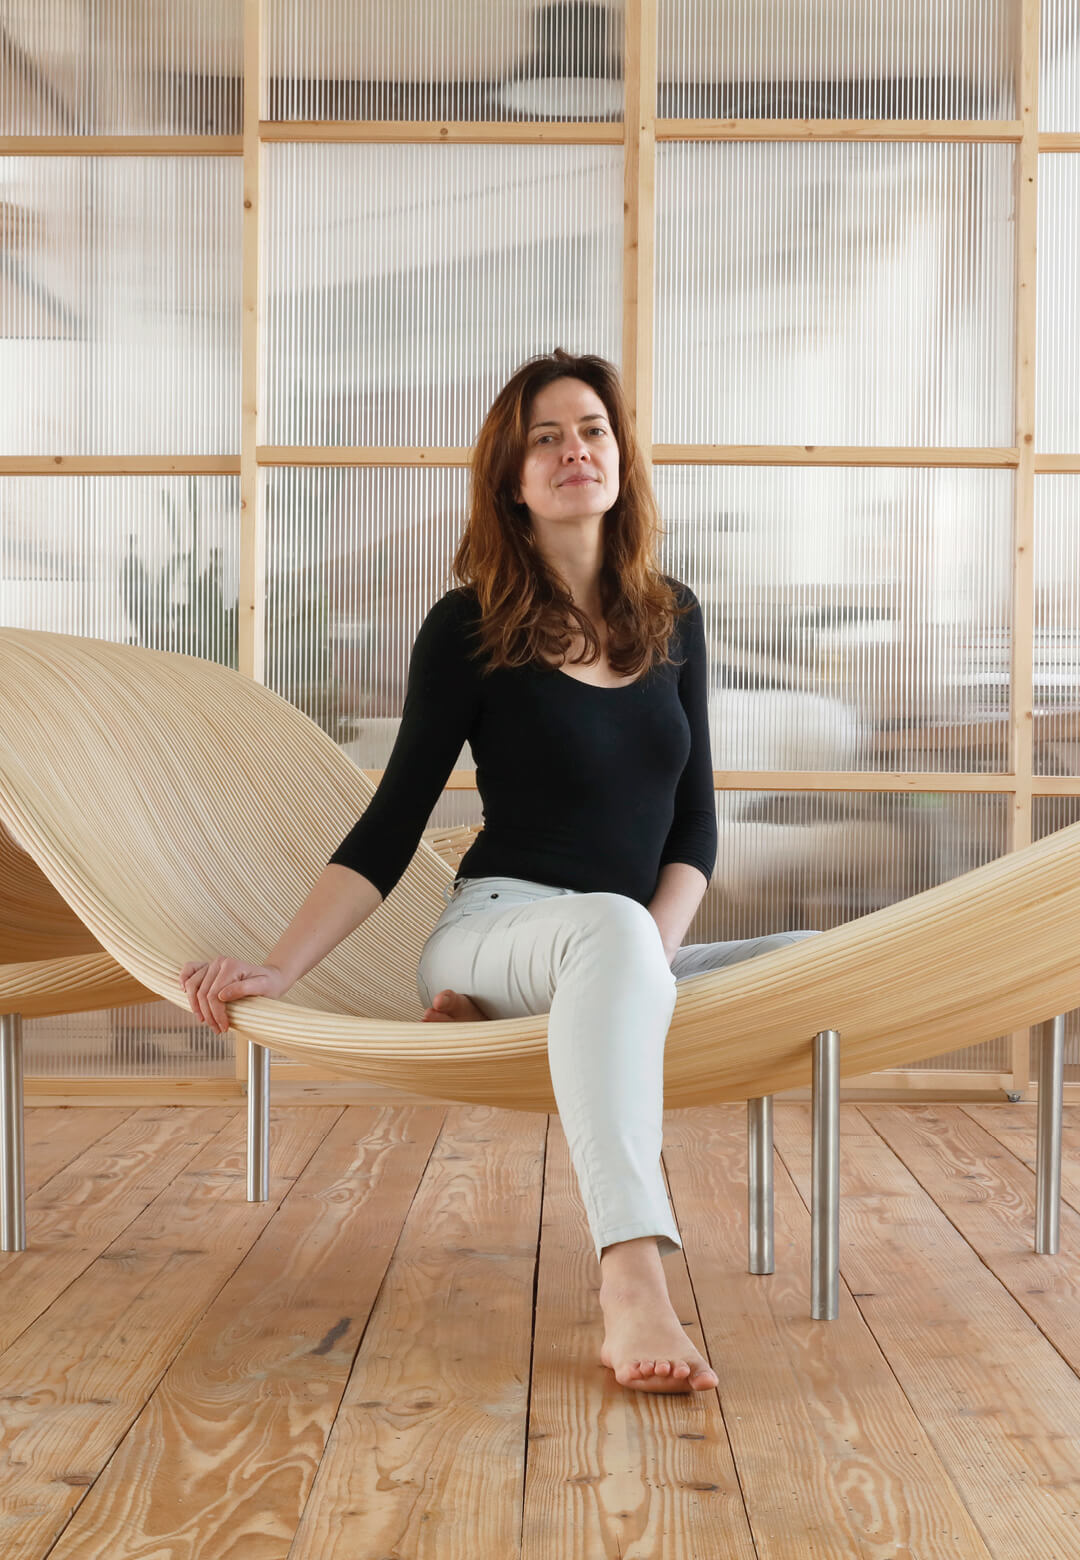 Crafting with nature, Wild Fibers by Aurélie Hoegy is an exploration of rattan's essence